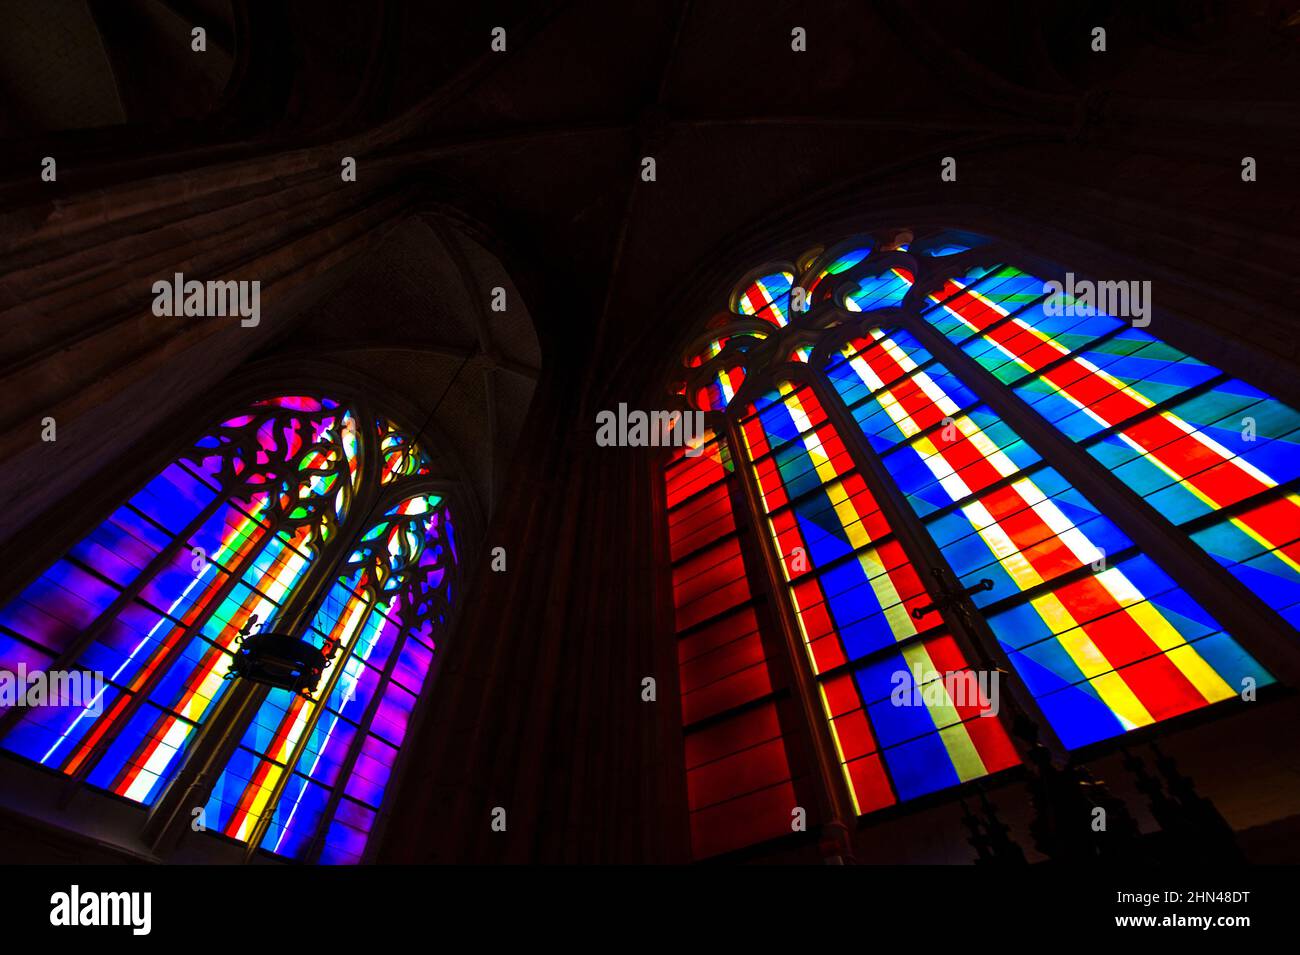 The contemporary stained glass windows of the Église Saint-Martin were made by Bernard Piffaretti for the main church of  at Harfleur, Normandy, Franc Stock Photo